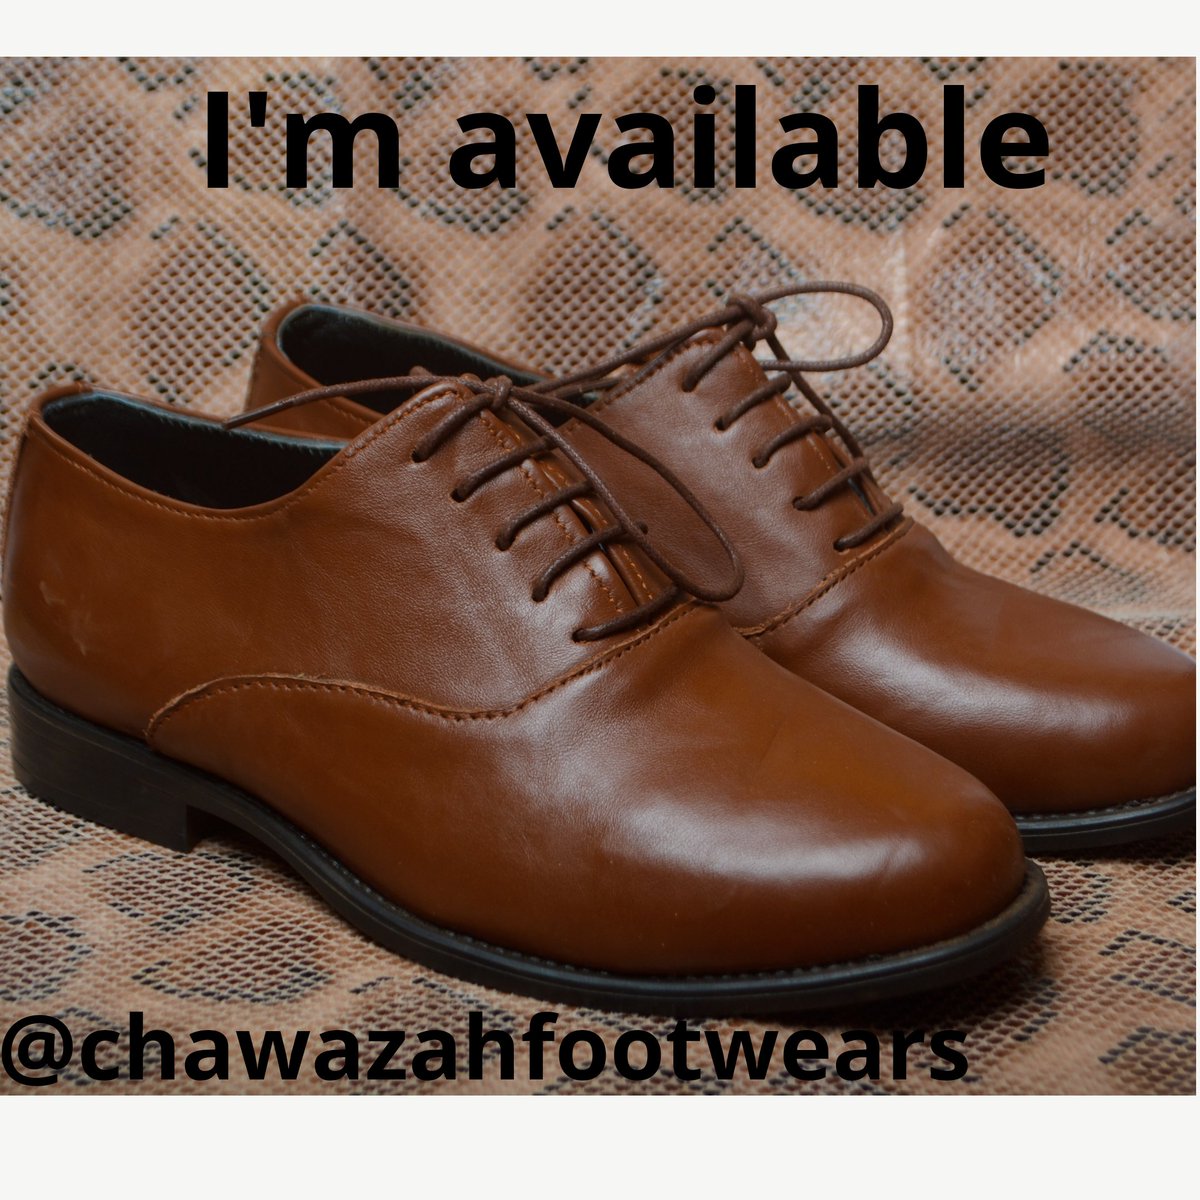 Call 08063489323 or send a dm to make your order

Brown Oxford shoe
#chawazahfootwears
#madeinnigeria
#menfashion 
#menfashionreview